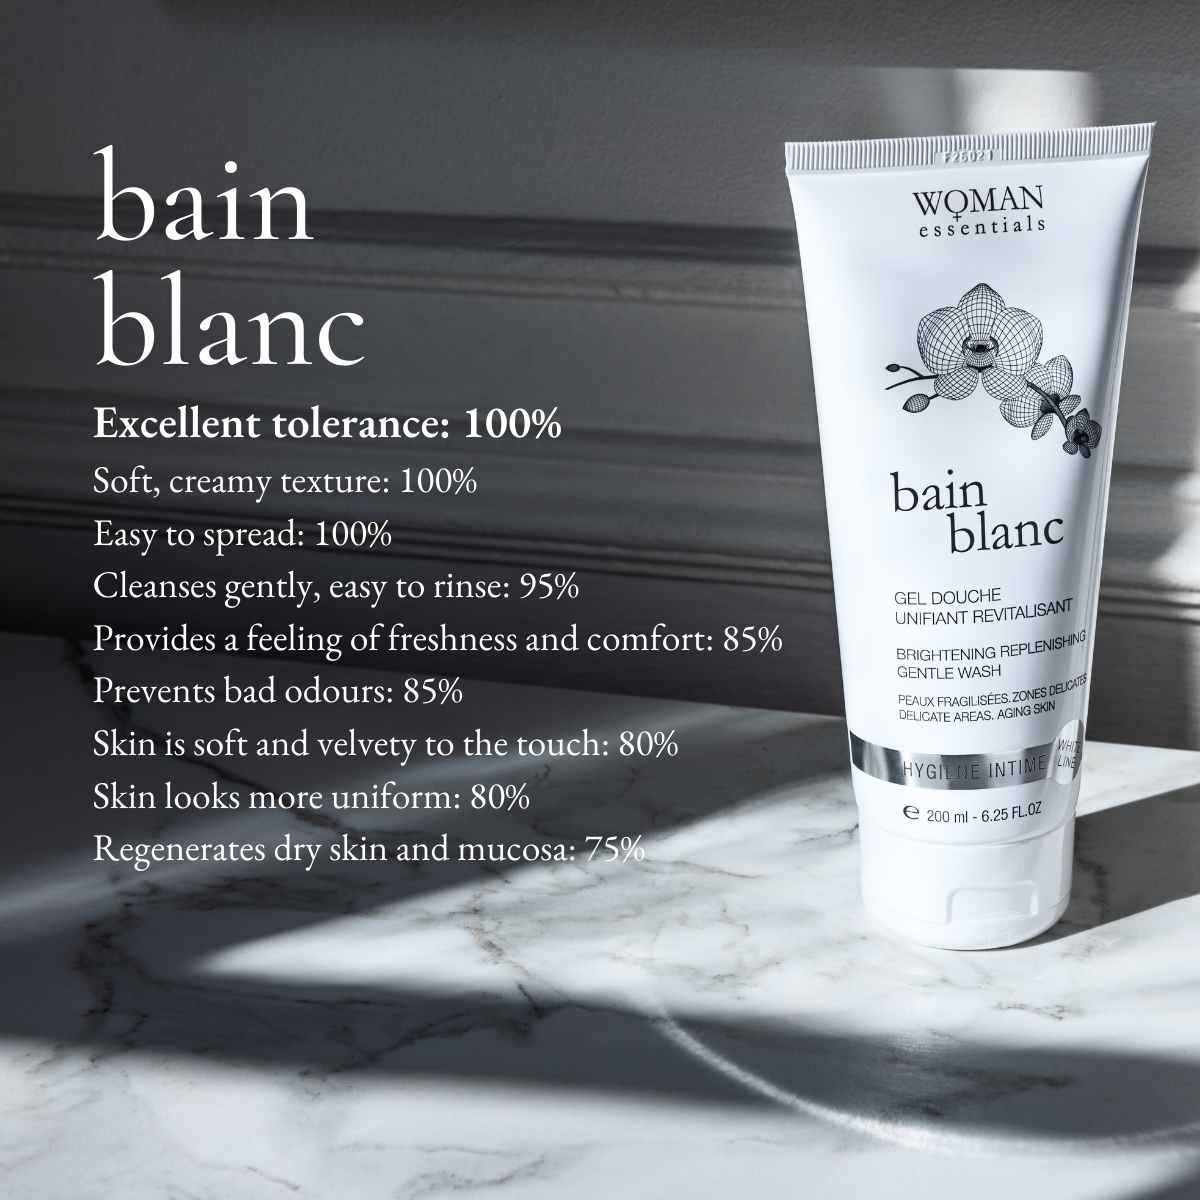 WOMAN ESSENTIALS 🇫🇷BAIN BLANC Brightening Replenishing Gentle Wash 200ml  ✨Intimate wash that prevents vaginal itch due to menopause dryness, yeast  infection✨Whitening feminine wash that corrects hyperpigmention✨France pH  care feminine wash